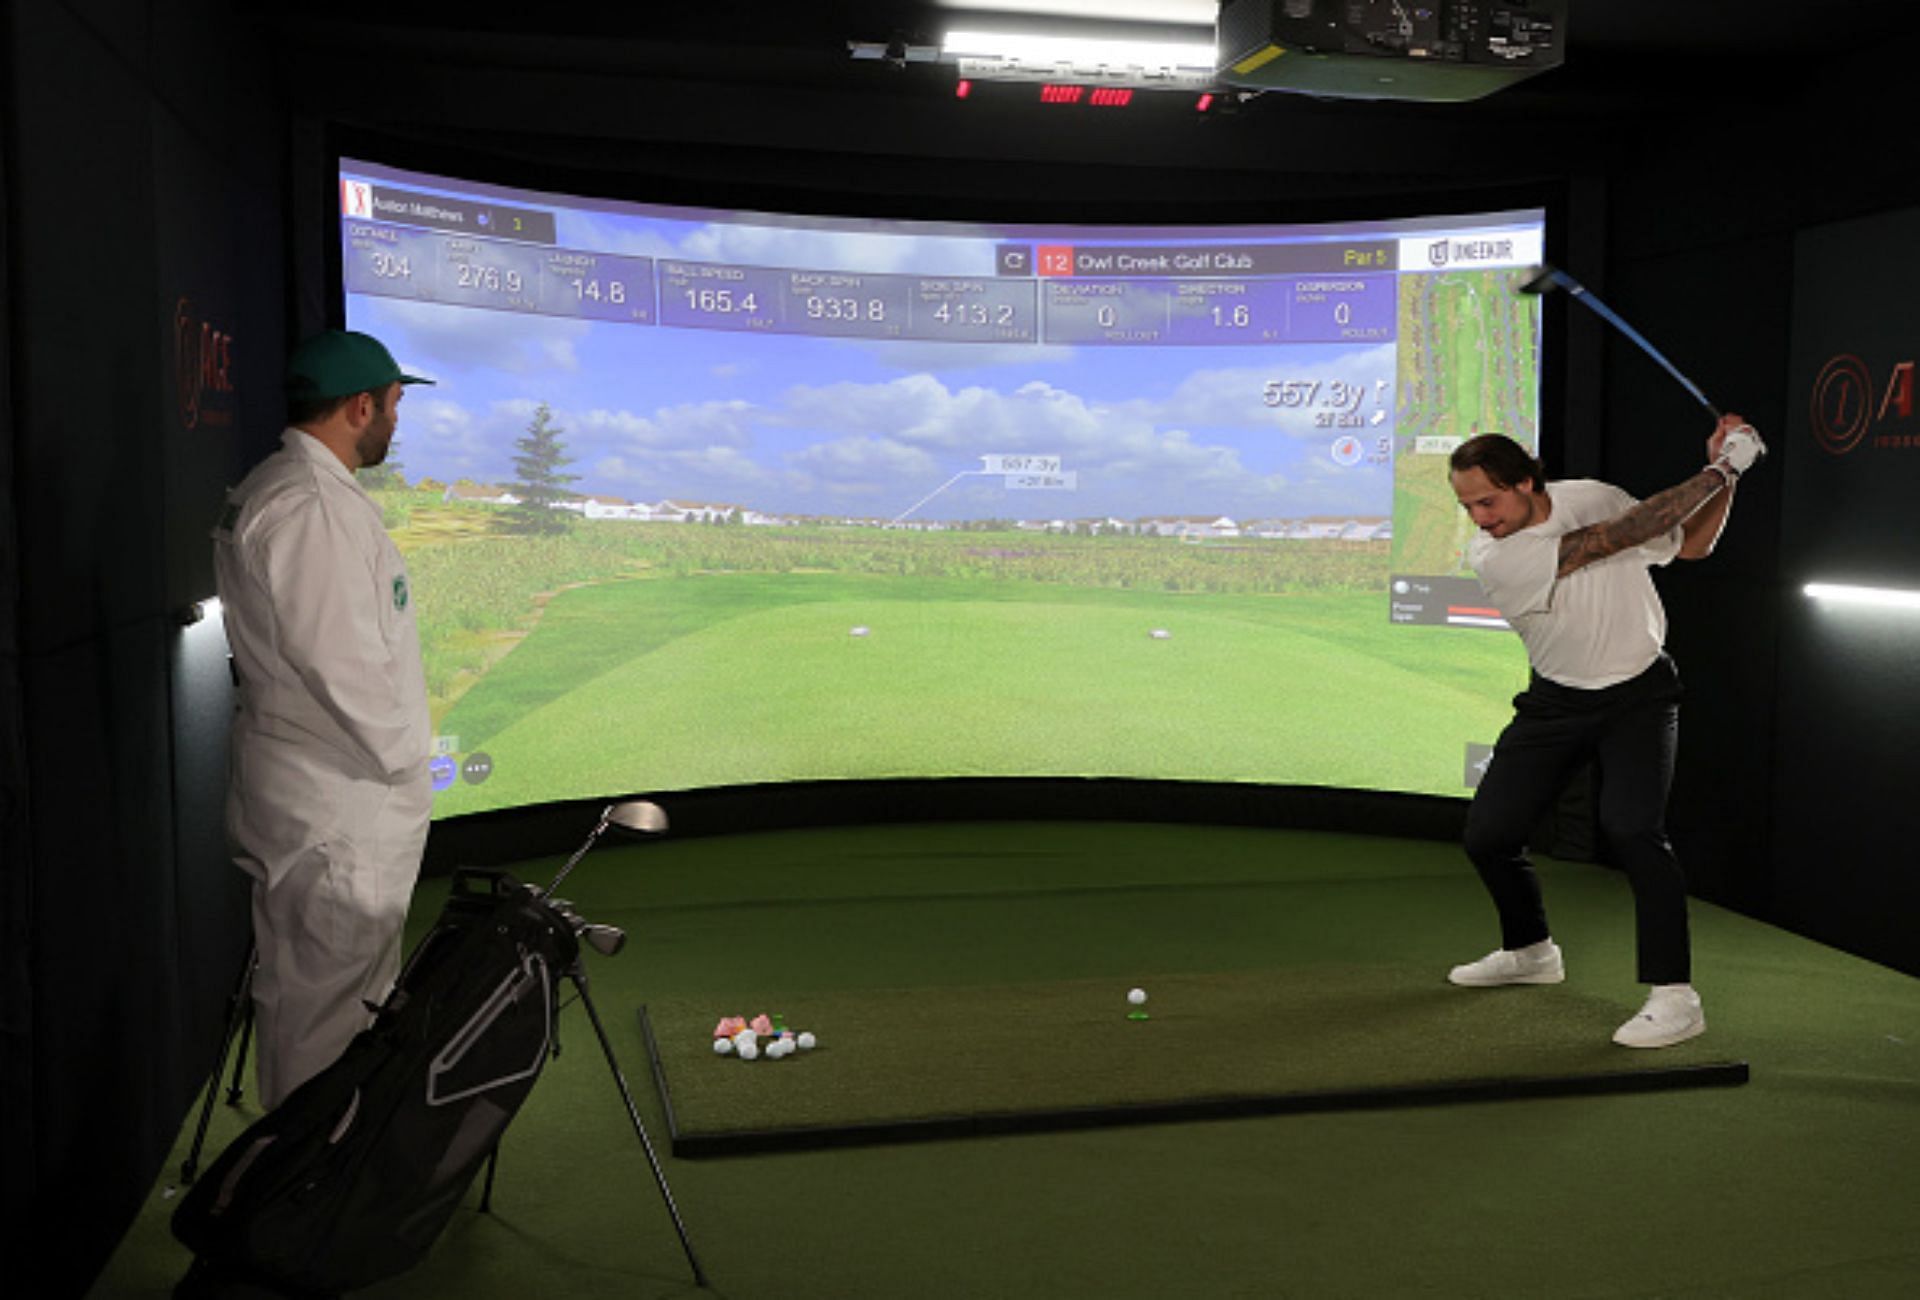 TGL simulator screen will be 20 times larger than regular simulators, like the one in this picture (Image via Getty).